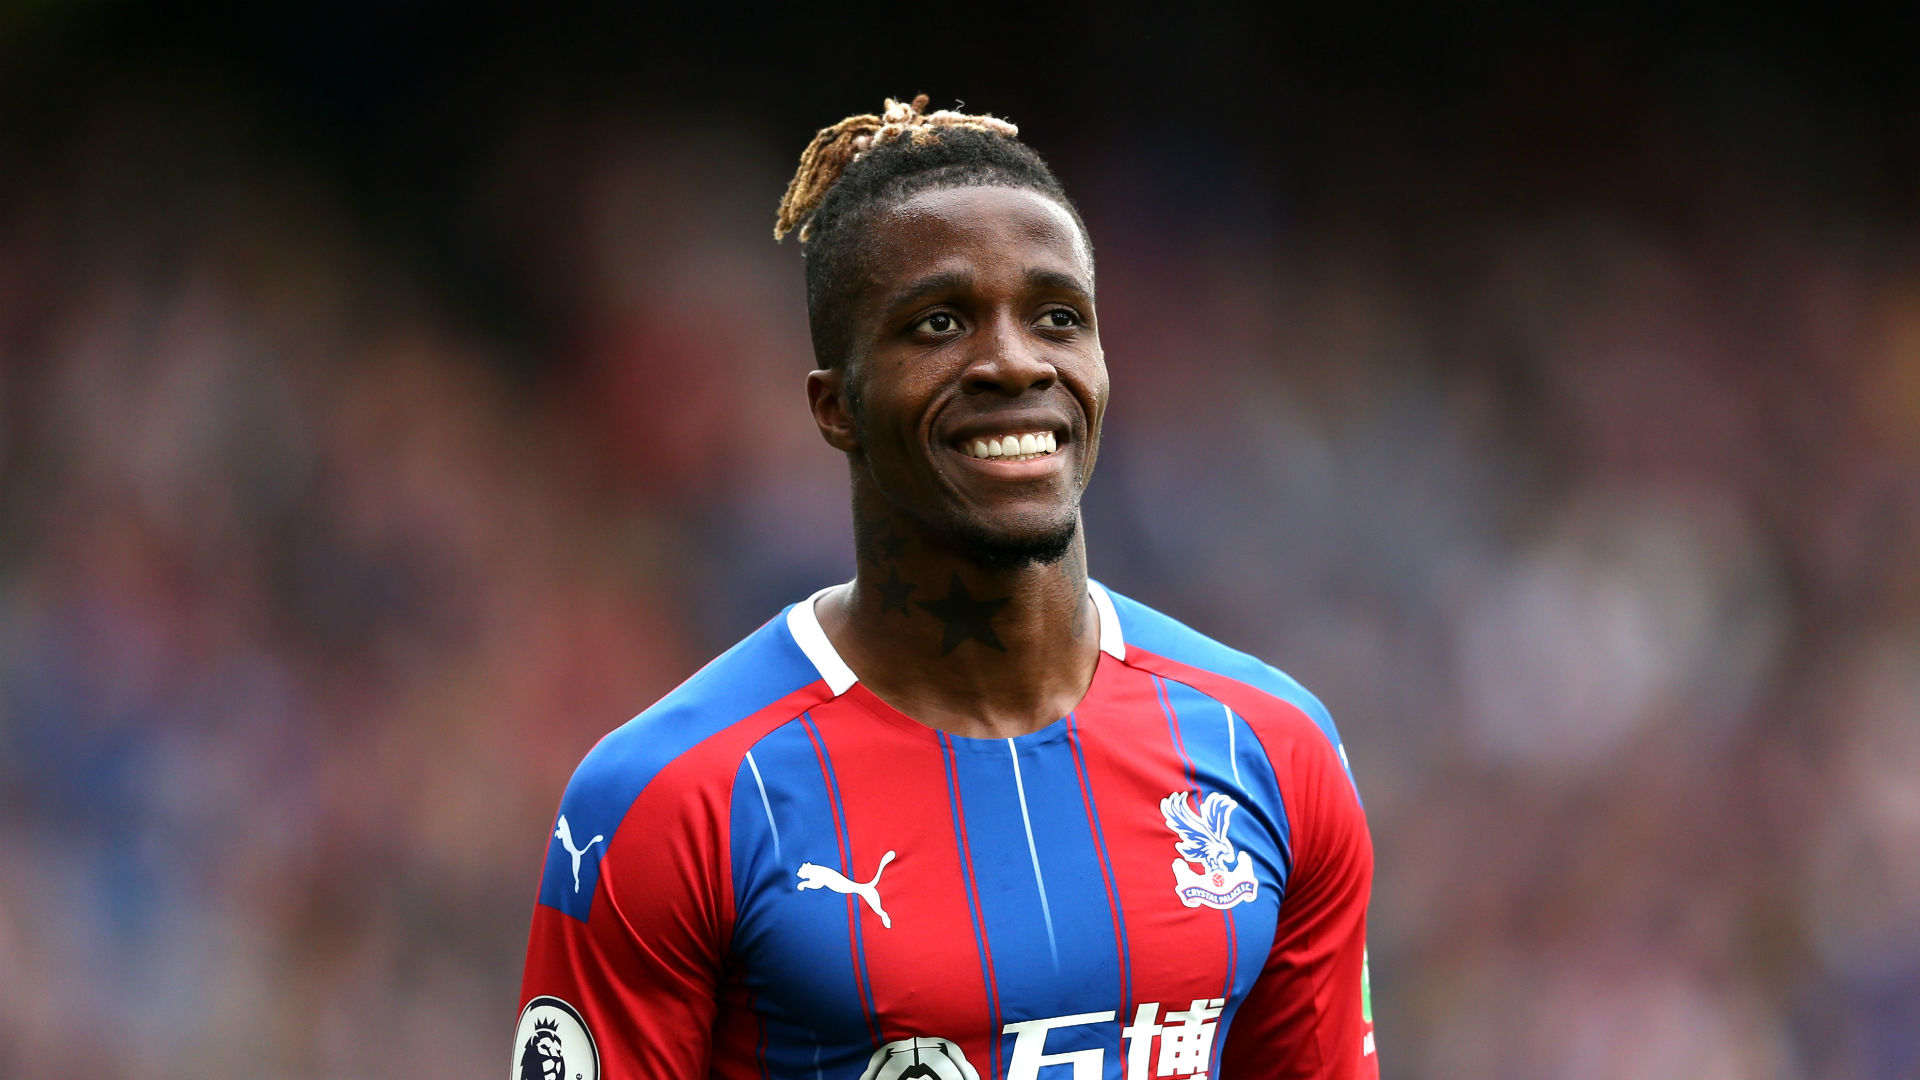 Zaha must respect his contract with Crystal Palace - Hodgson